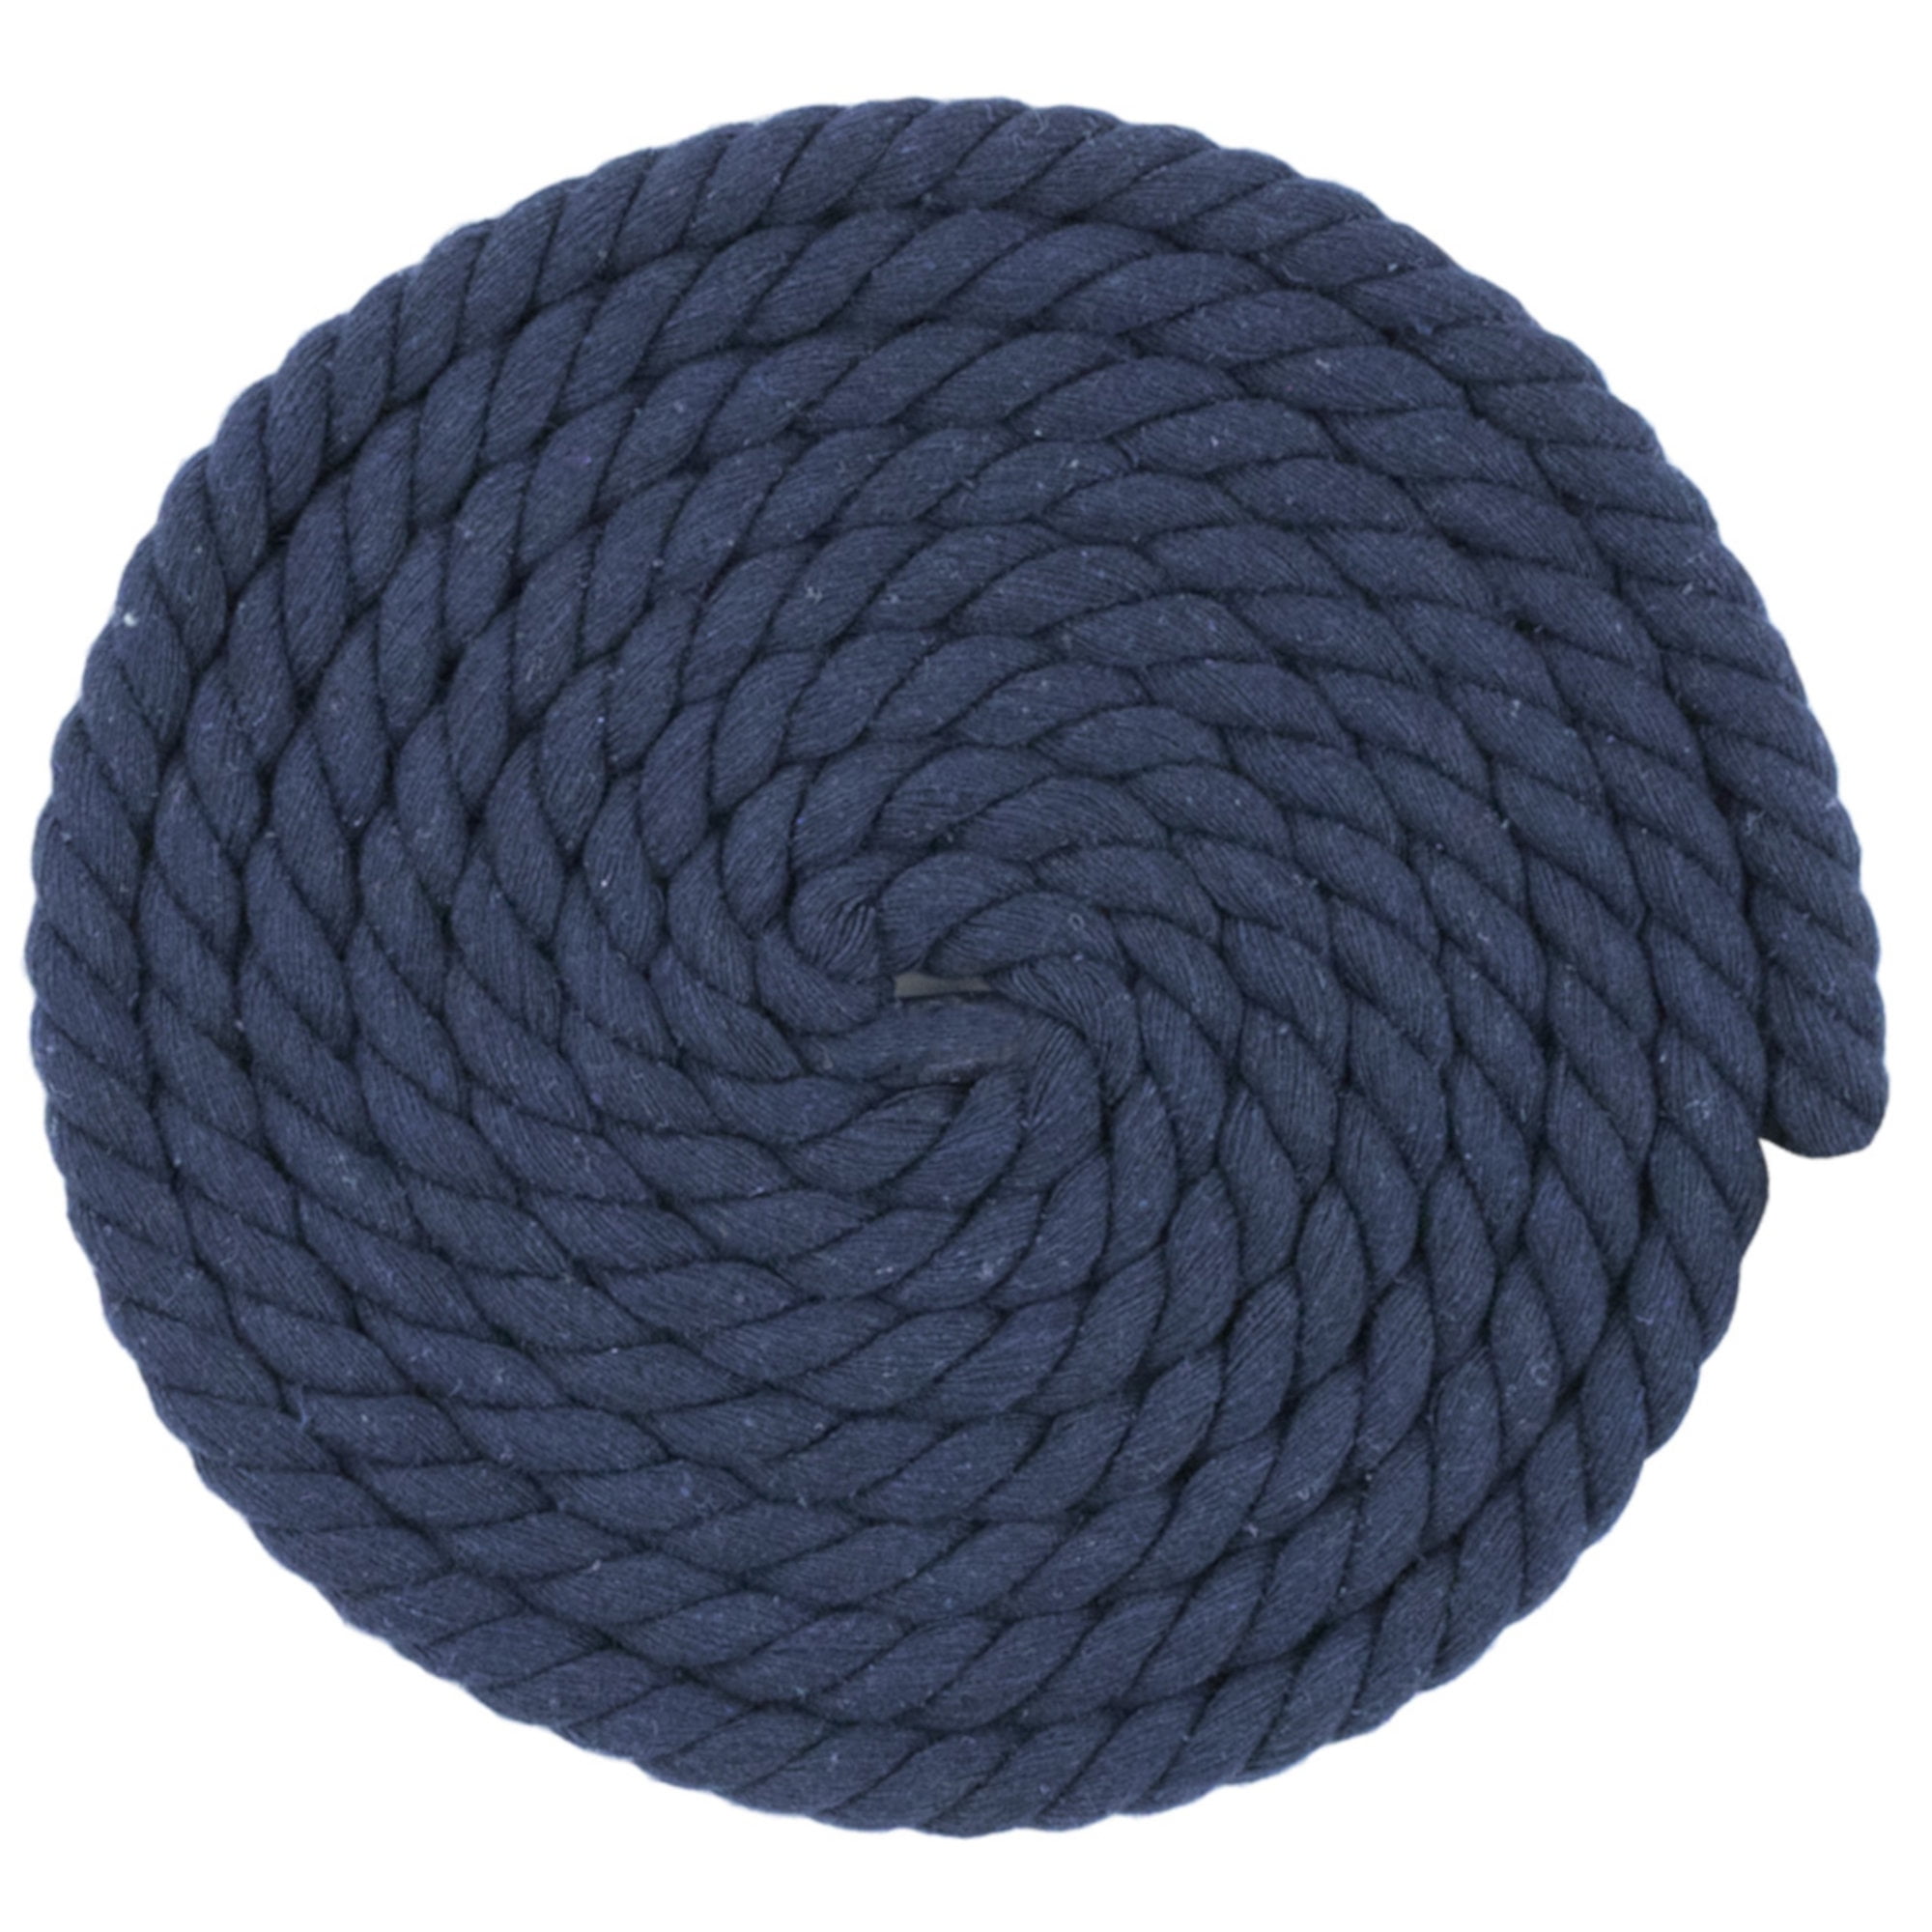 West Coast Paracord 1/2-Inch Thick Super Soft Artisan Decorative Twisted 100% Cotton Rope - Multiple Colors and Lengths - Crafting & Macrame, Size: 10